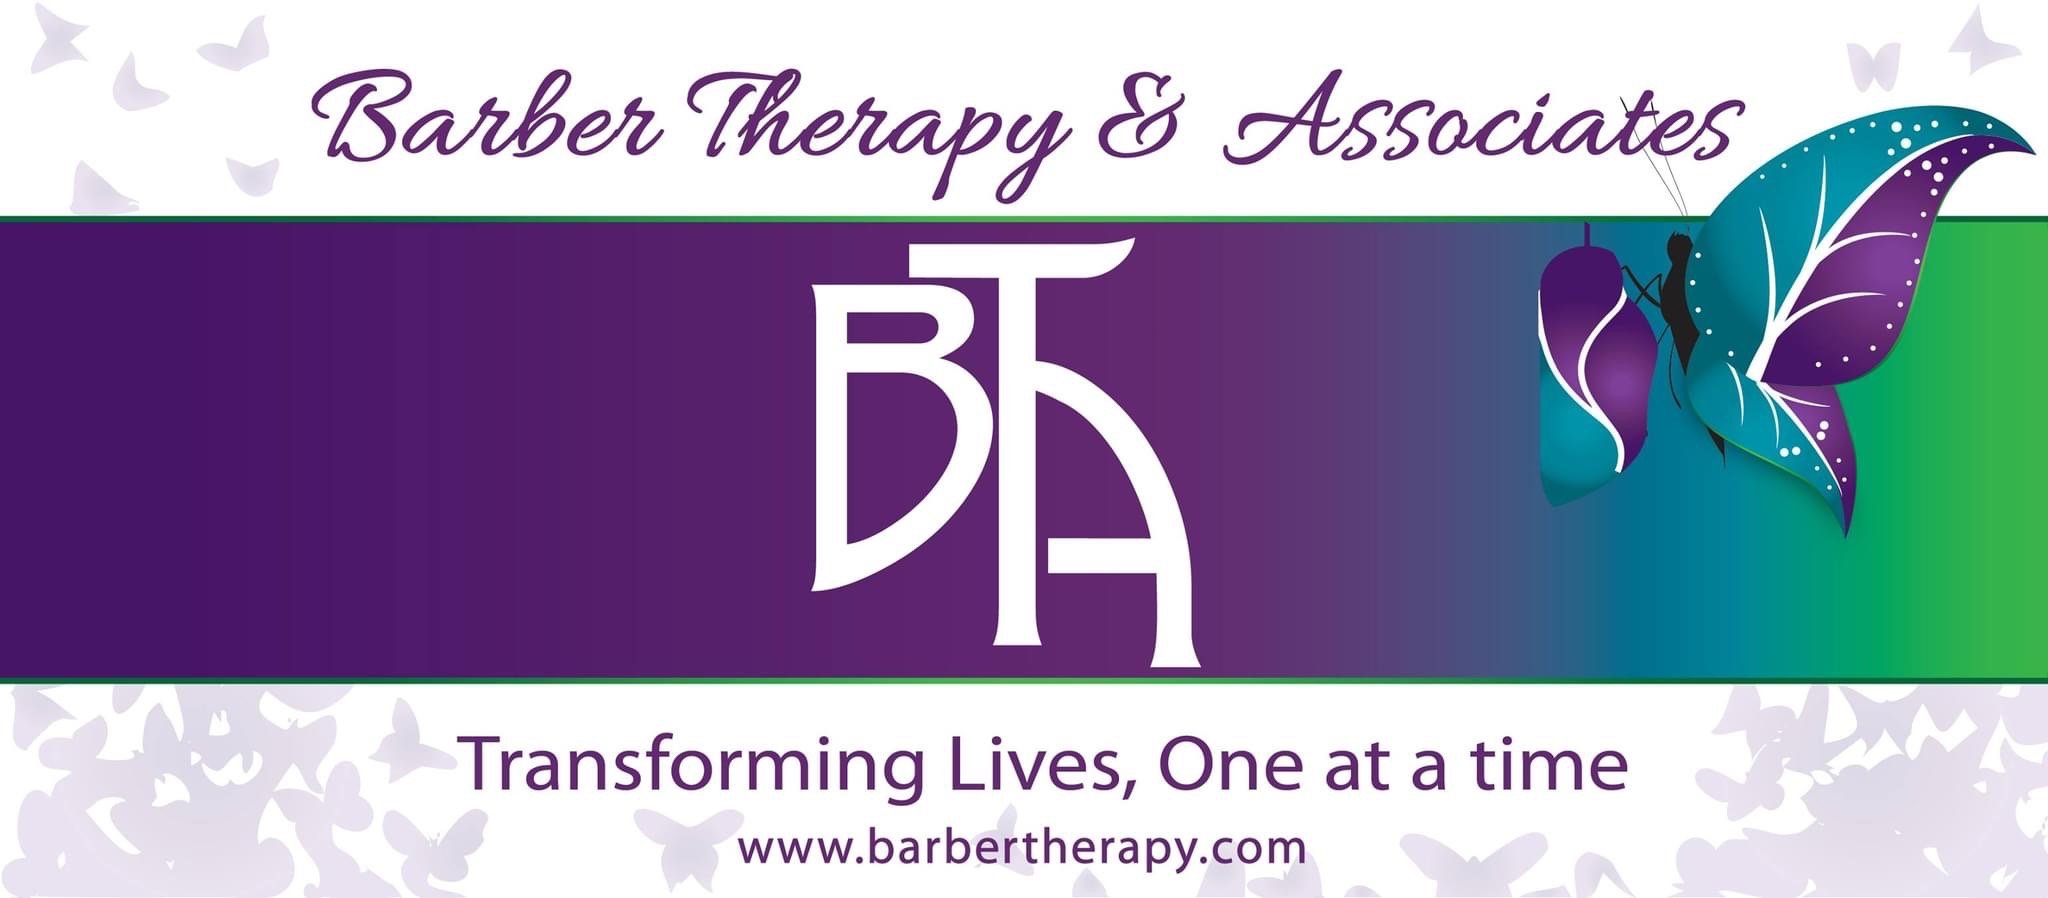 Barber Therapy and Associates.JPG